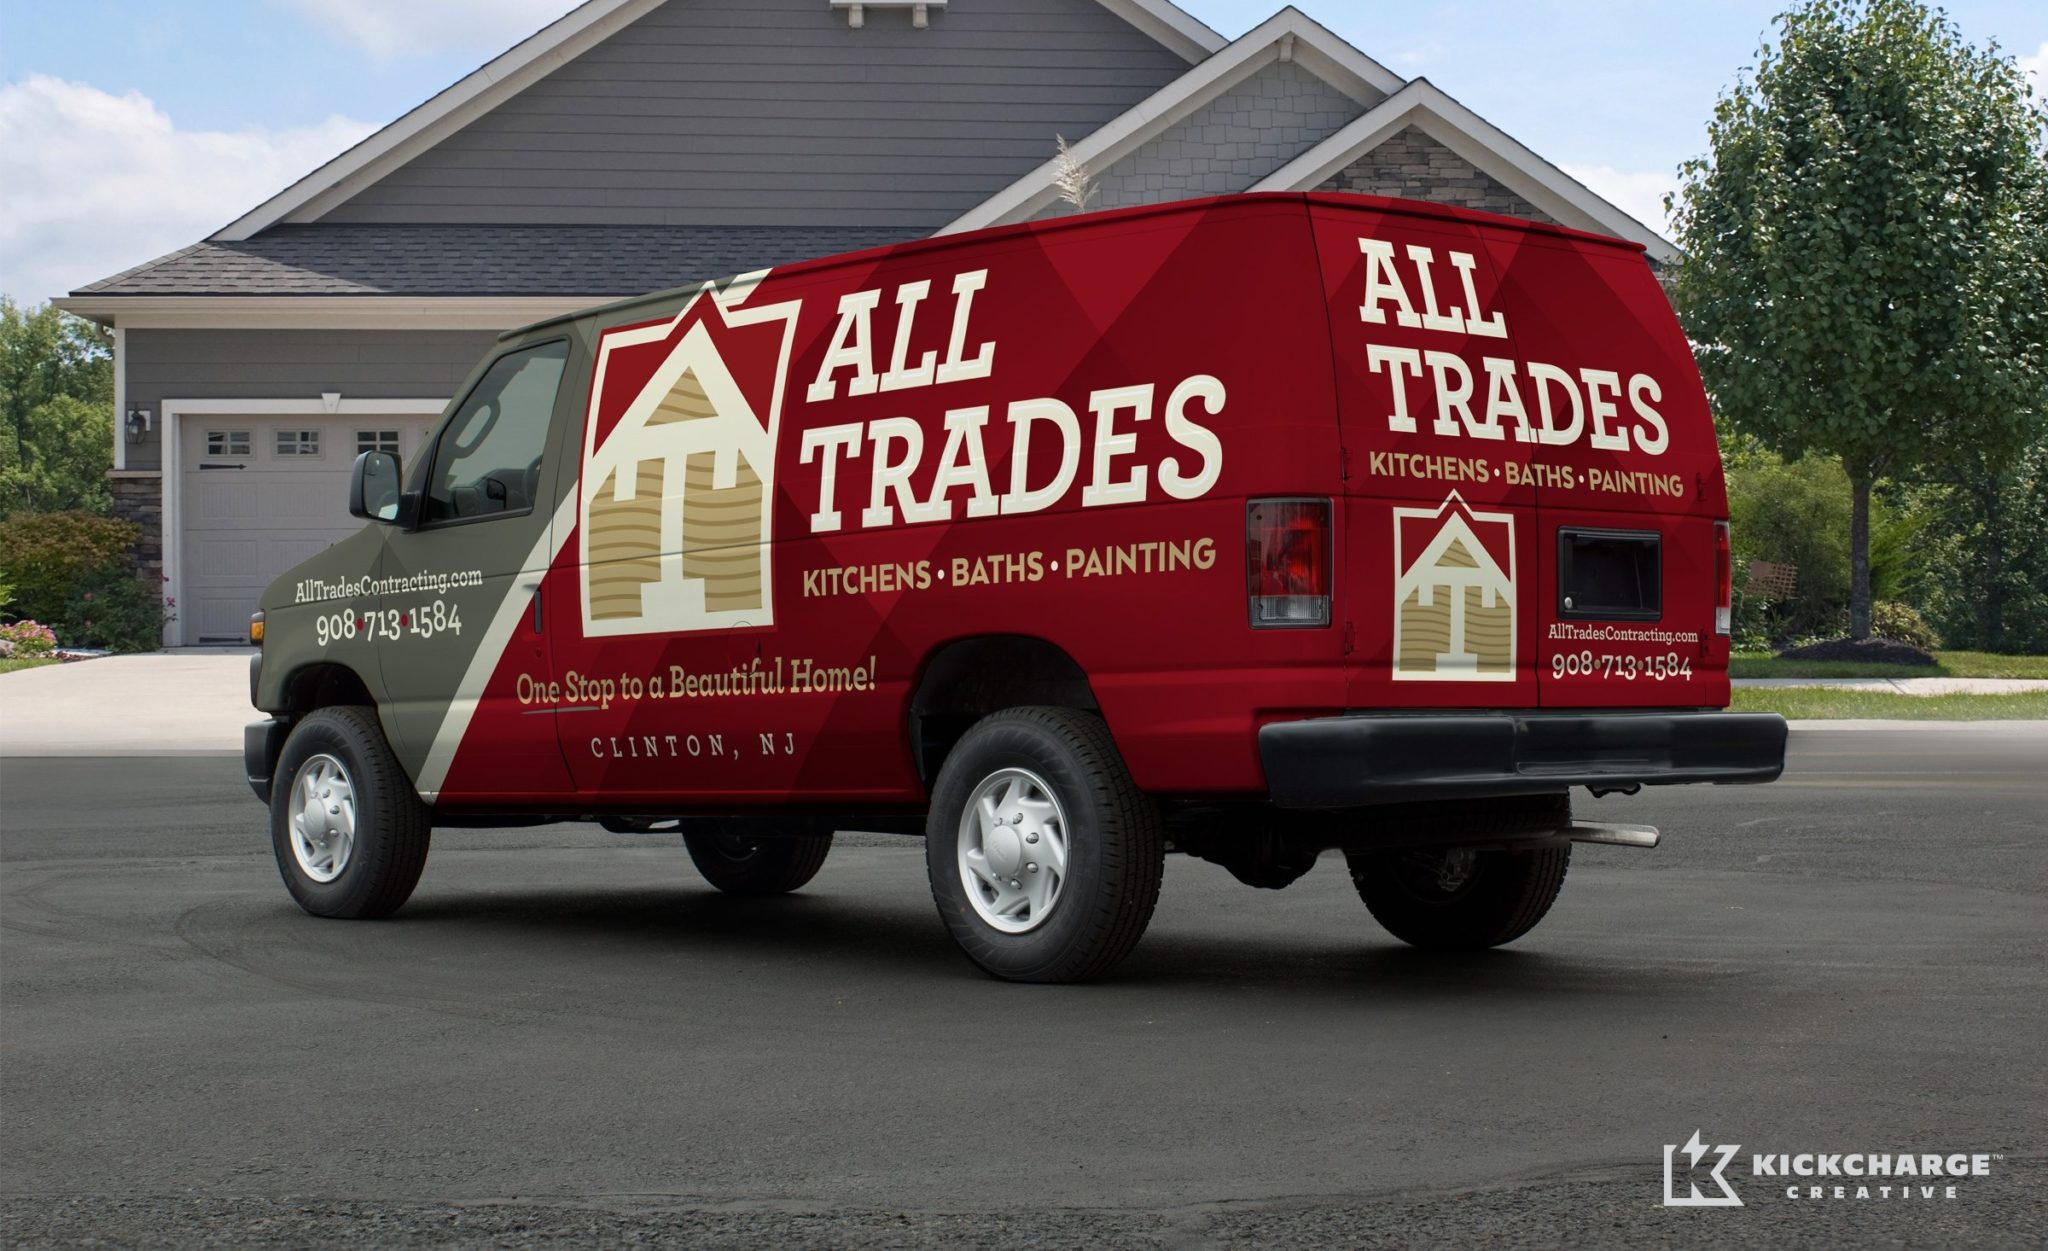 Vehicle wrap design we created for this Clinton, NJ based kitchen, bath and painting contractor.